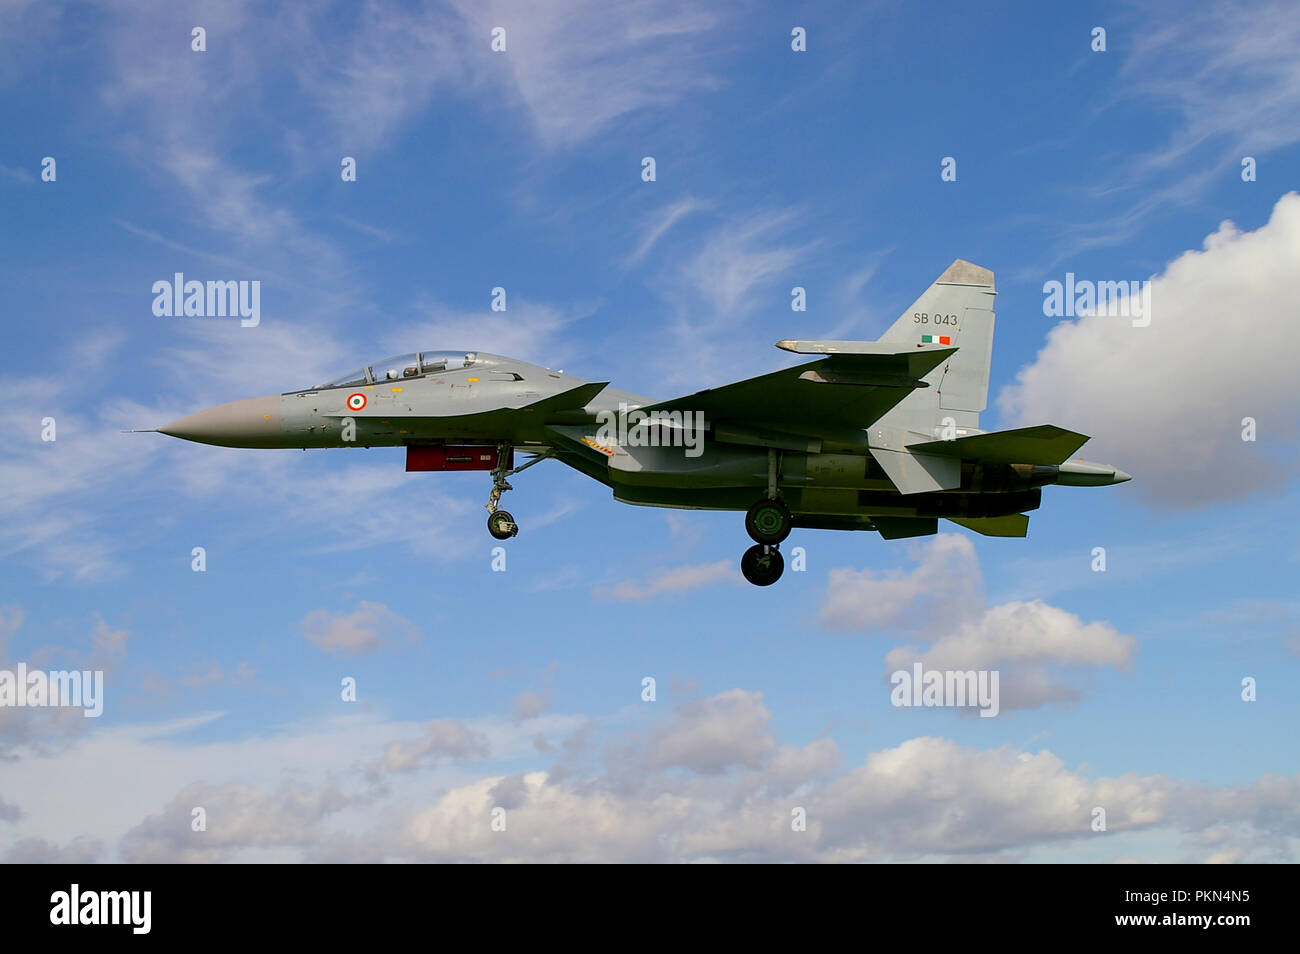 Indian Air Force Sukhoi Su-30MKI fighter jet plane, air superiority fighter. Su30 Flanker H Russian designed, built by Hindustan Aeronautics Limited Stock Photo